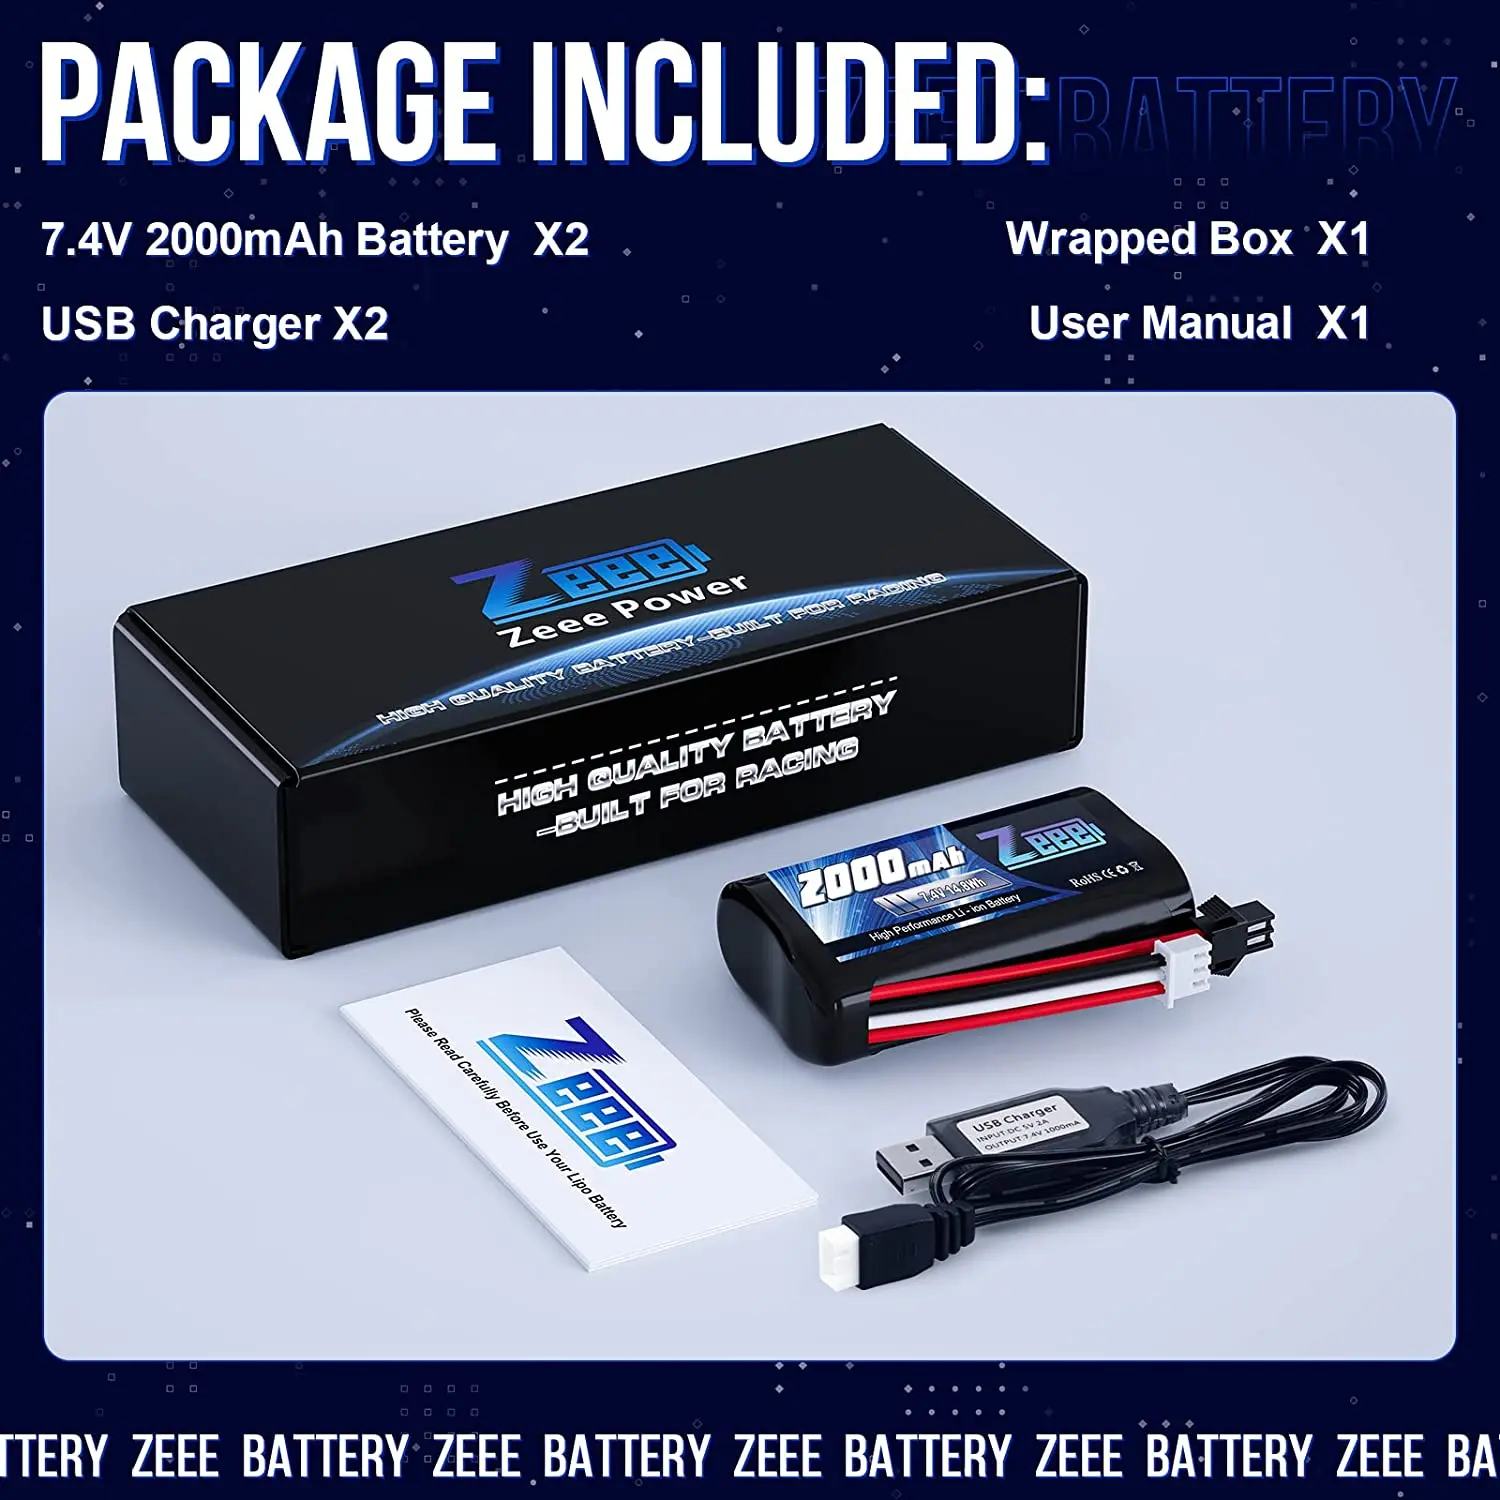 2Units Zeee 2S Li-ion Battery 7.4V 2000mAh Battery with SM 2P Connector 2 USB Charger for RC Cars Trucks FPV Racing Hobby Parts images - 6